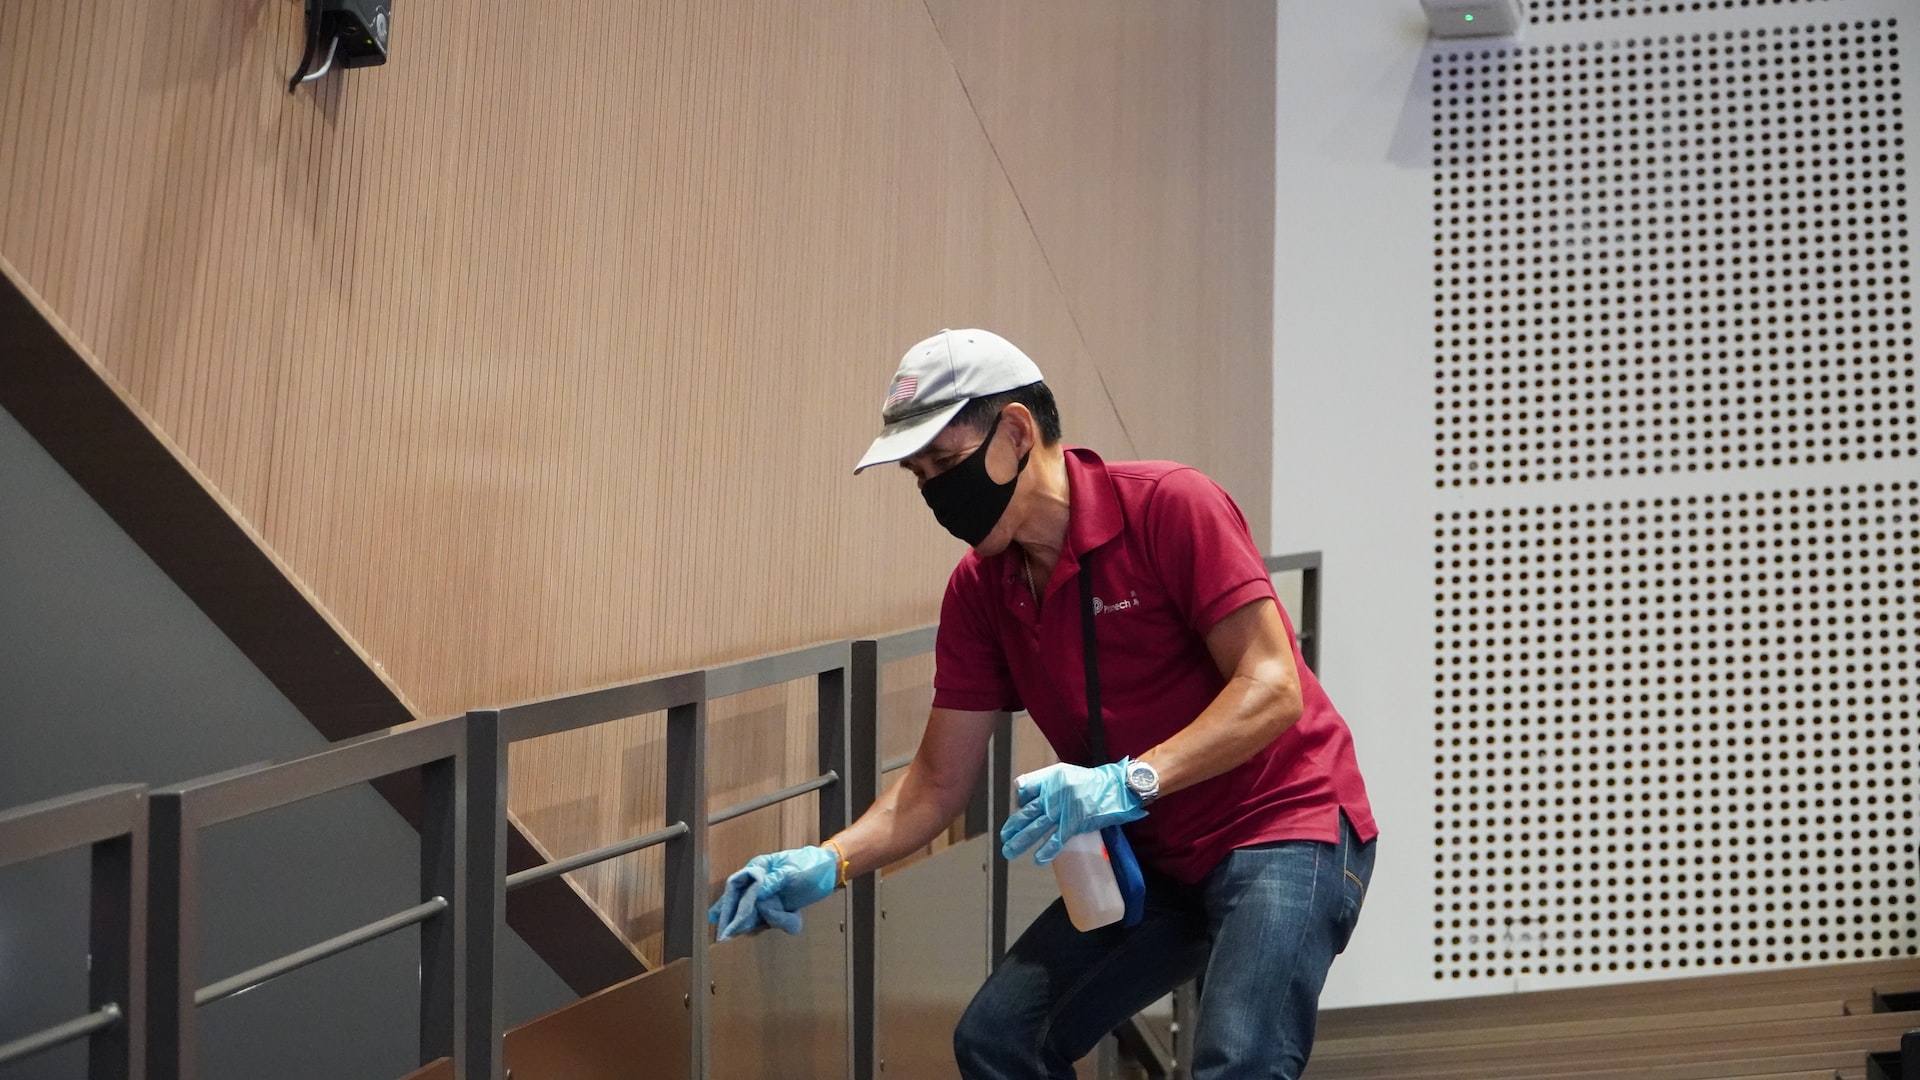 Man cleaning a stair railing outside a building